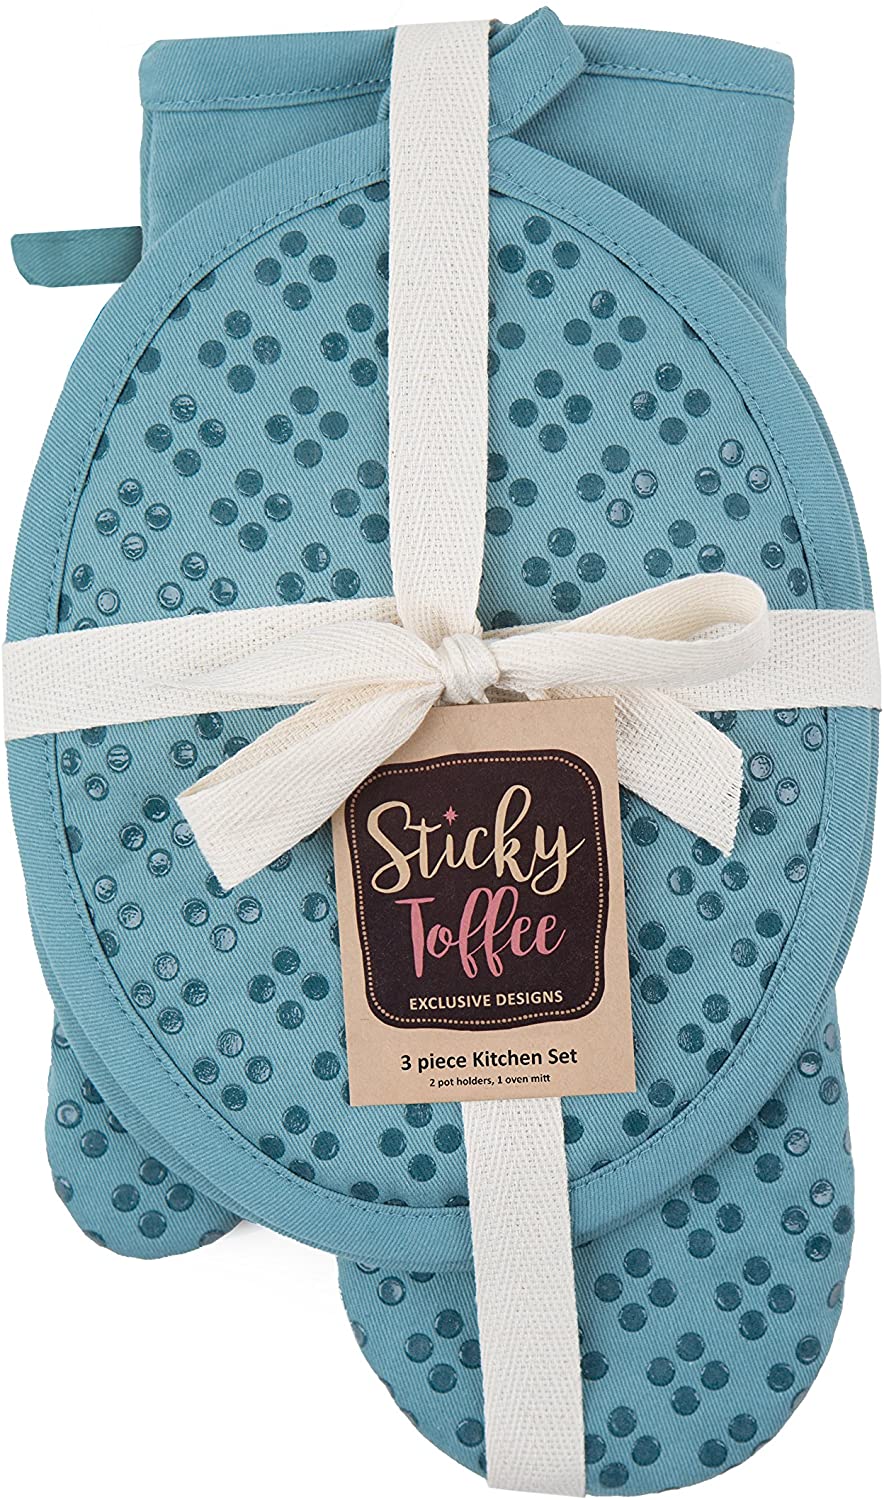 Sticky Toffee Printed Silicone Oven Mitt and Pot Holders, 100% Cotton, 3 Piece Set, Brown